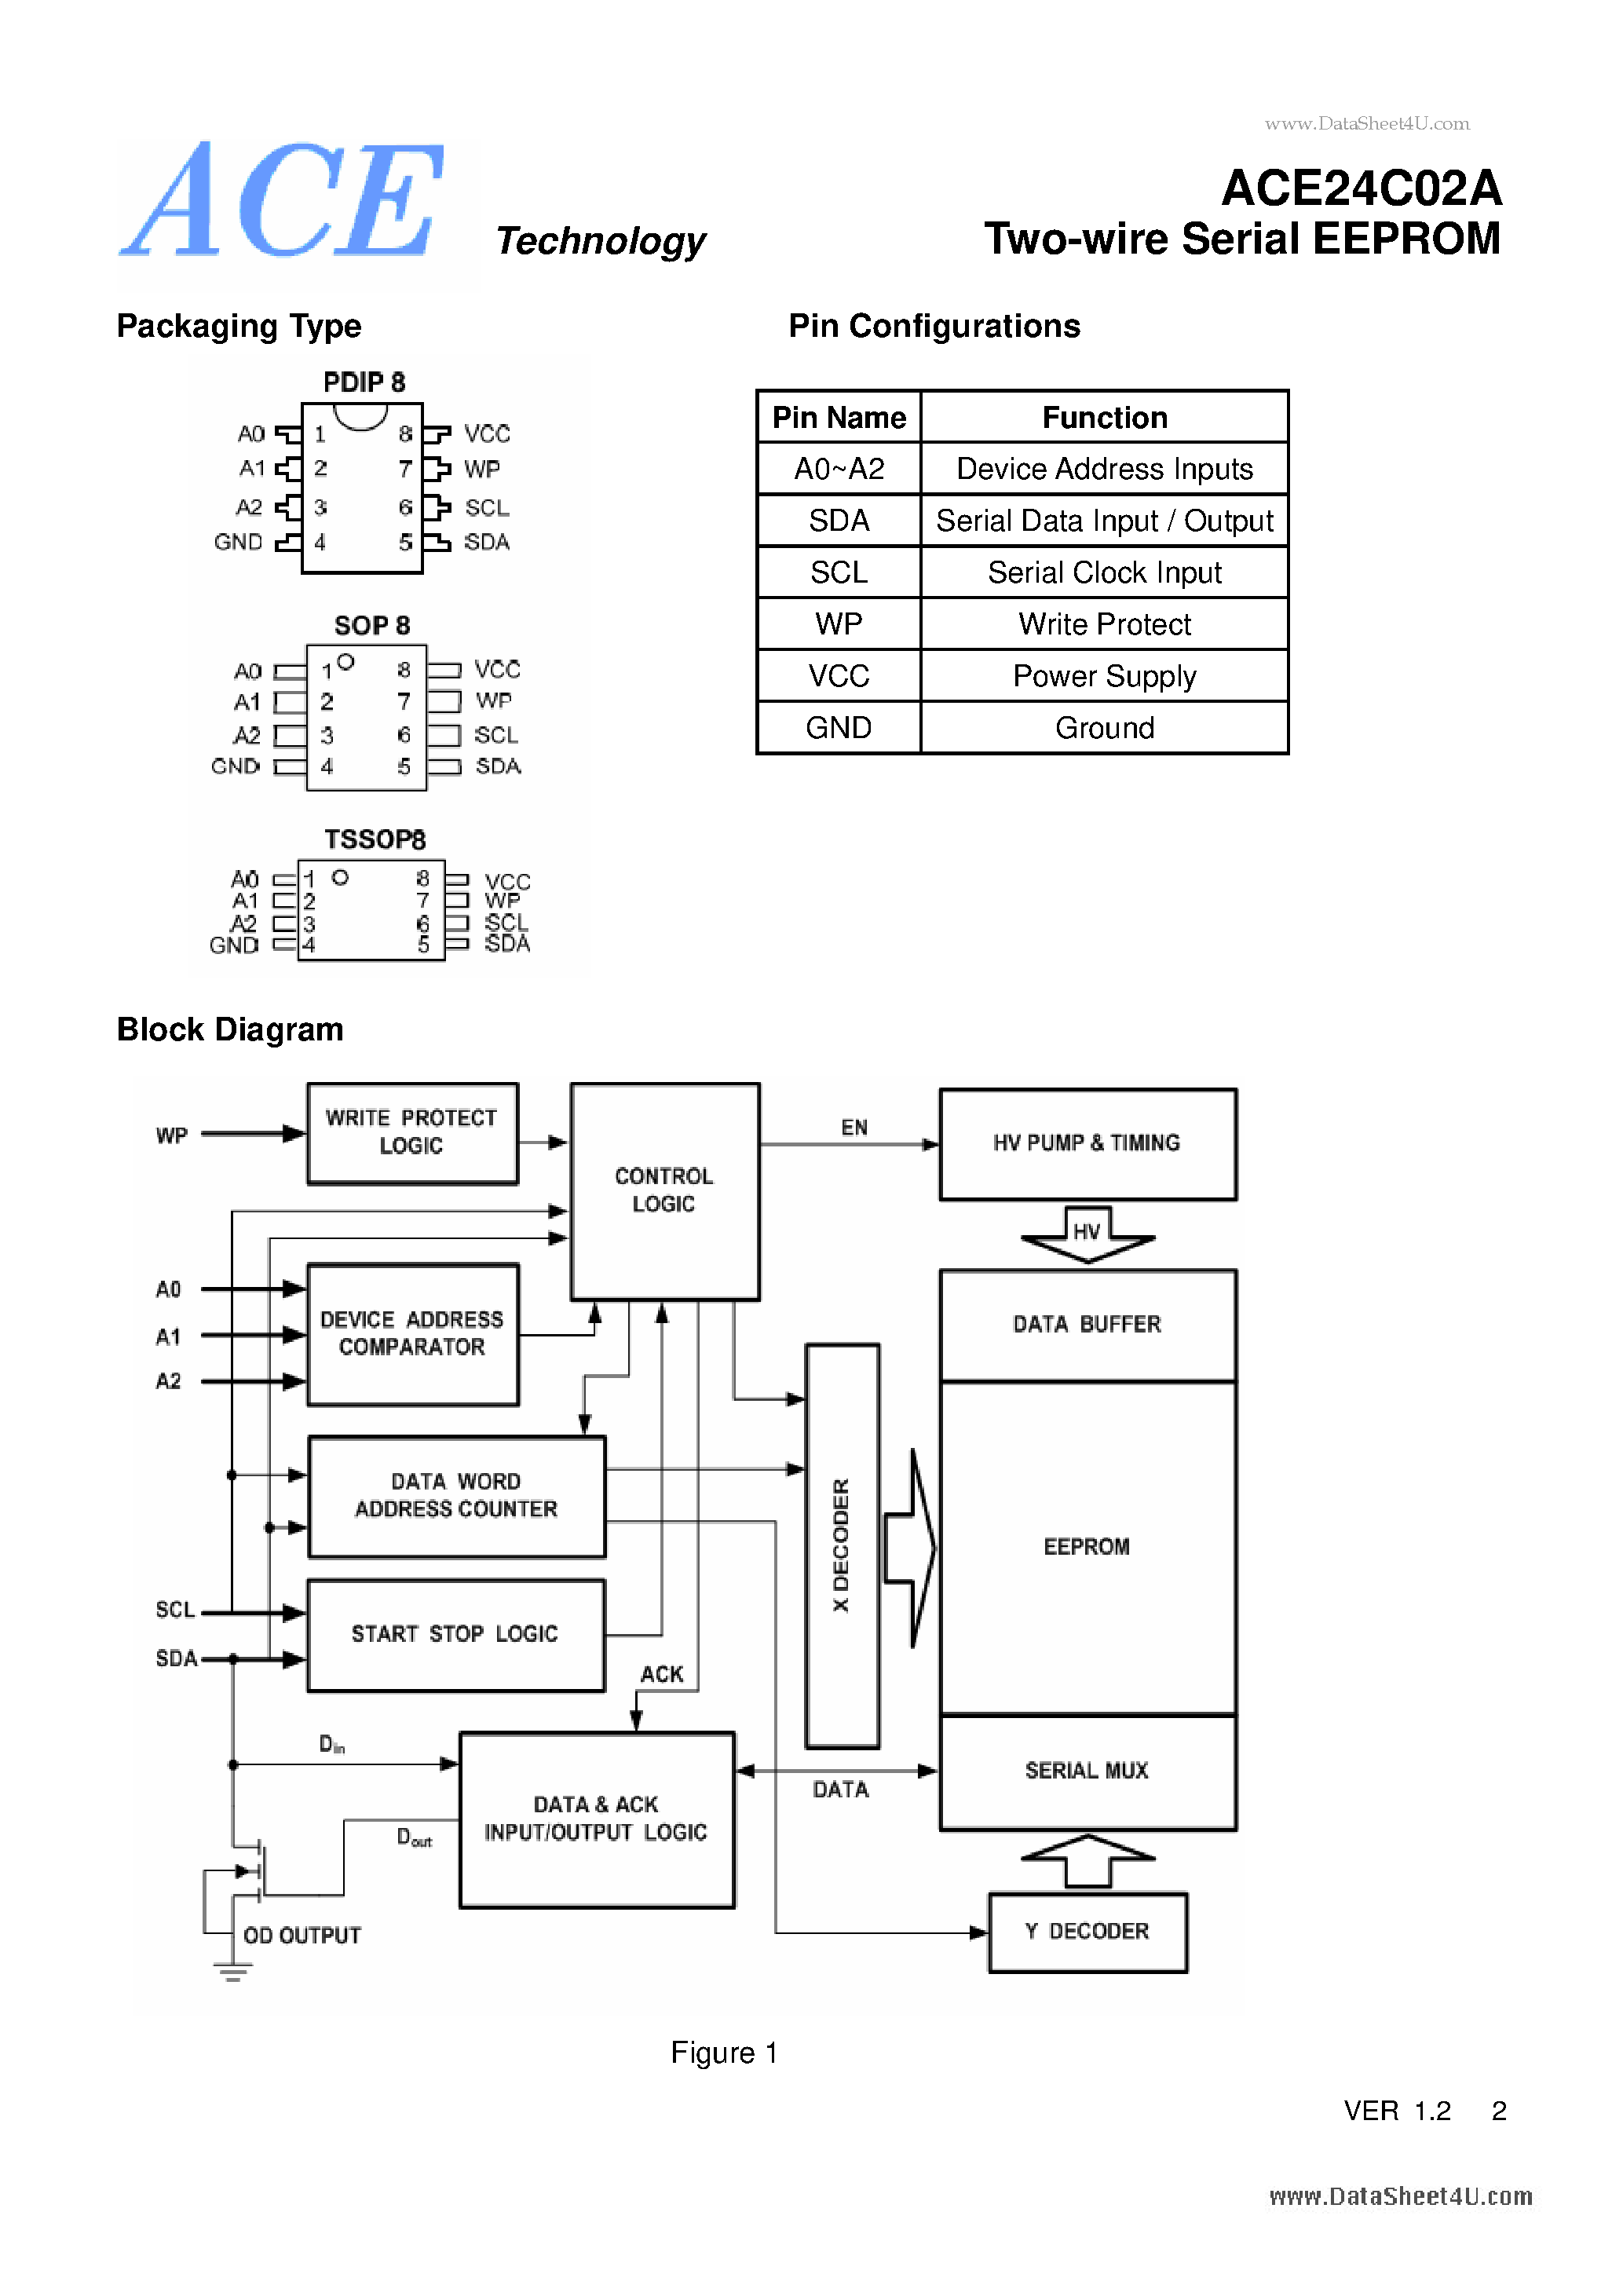 Datasheet ACE24C02A - Two-wire Serial EEPROM page 2